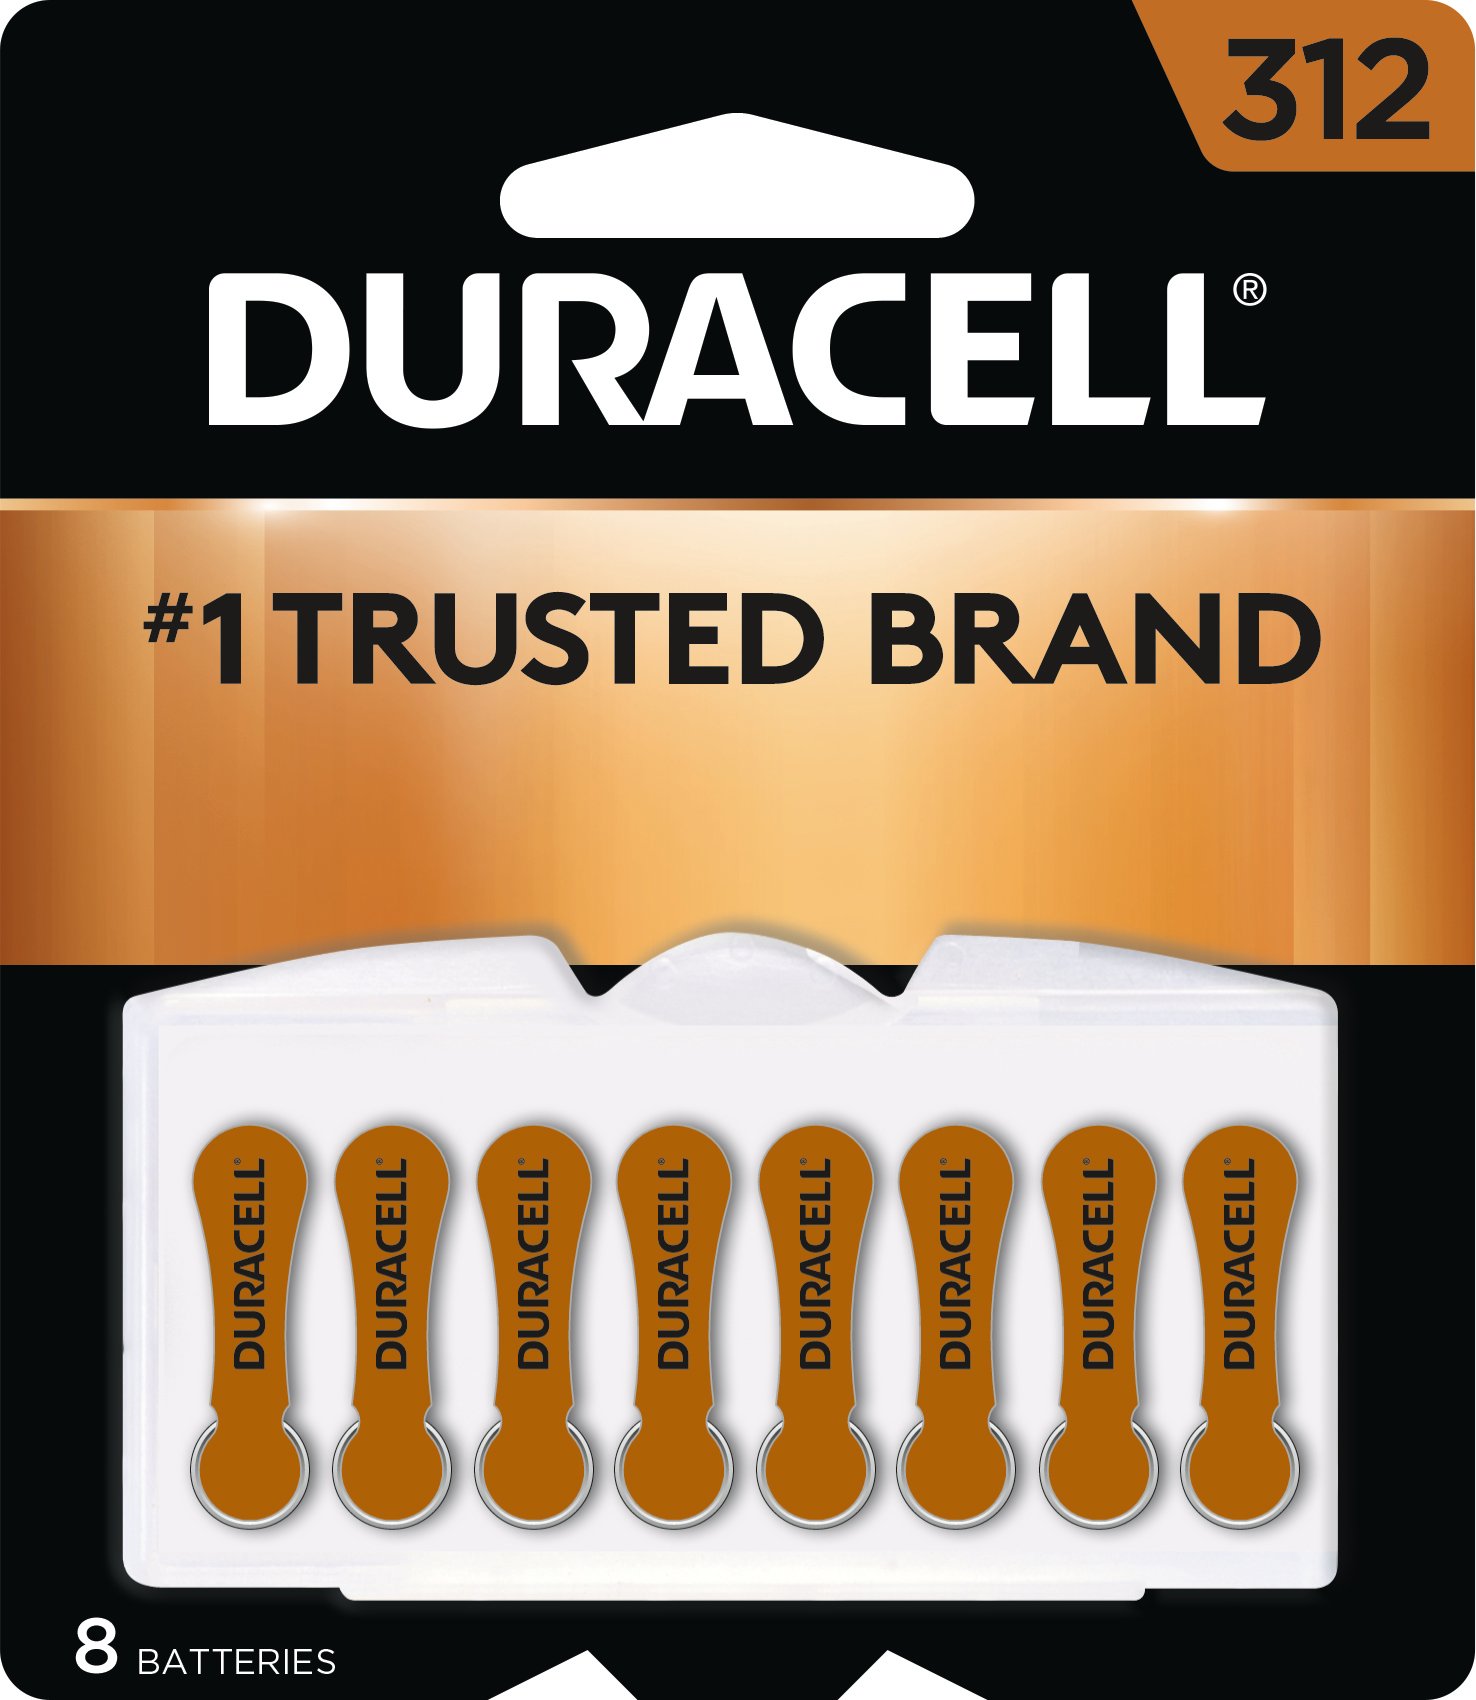 Duracell Size 312 Hearing Aid Battery